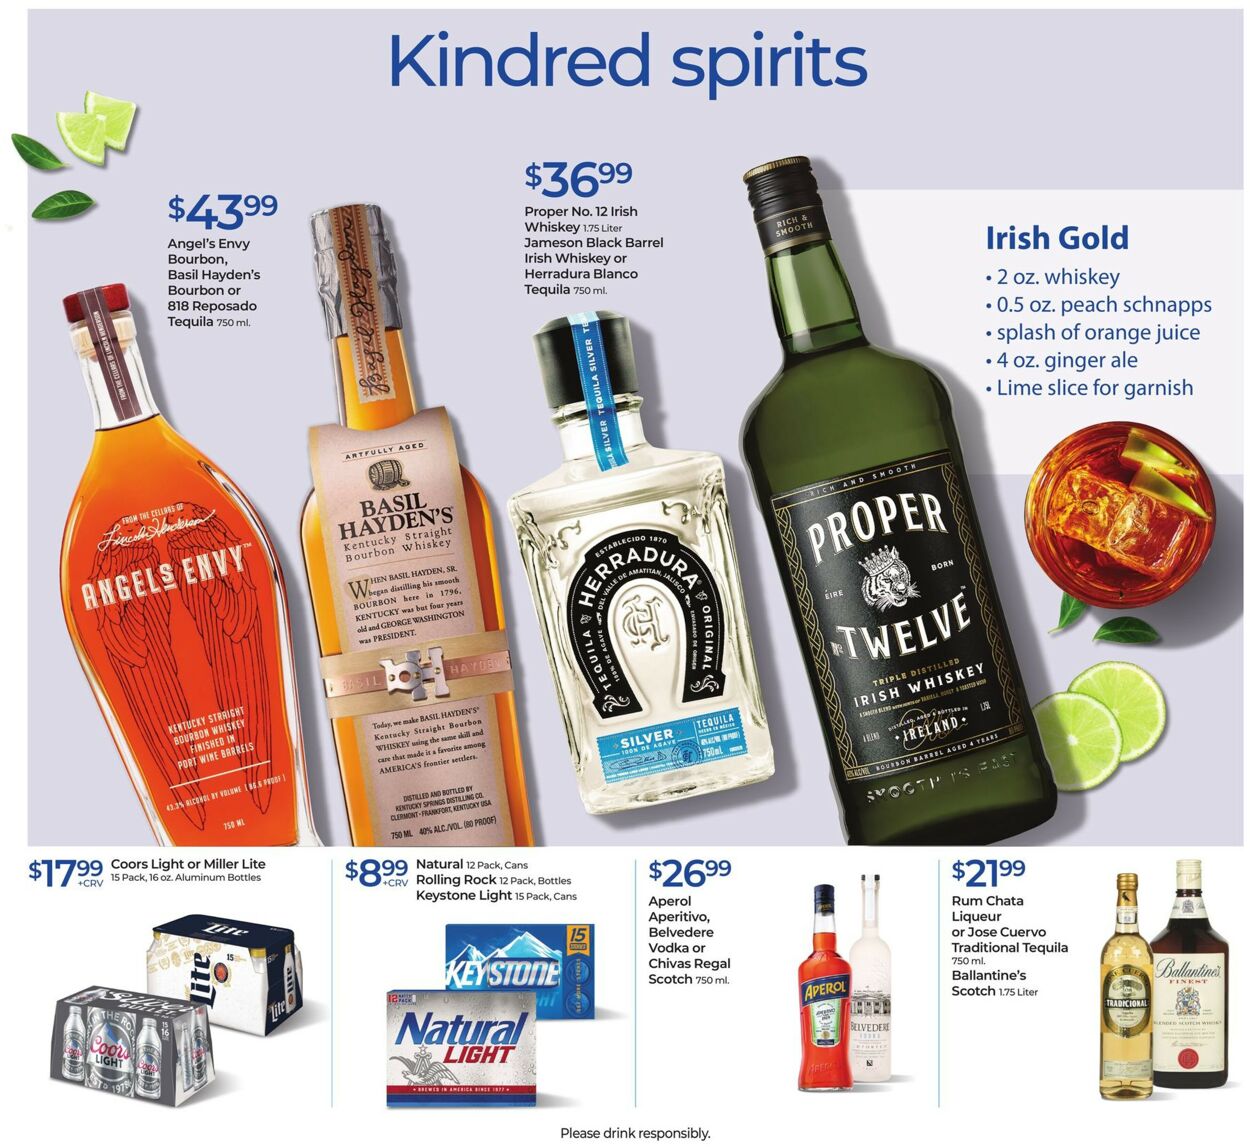 Rite Aid Ad from 01/29/2023